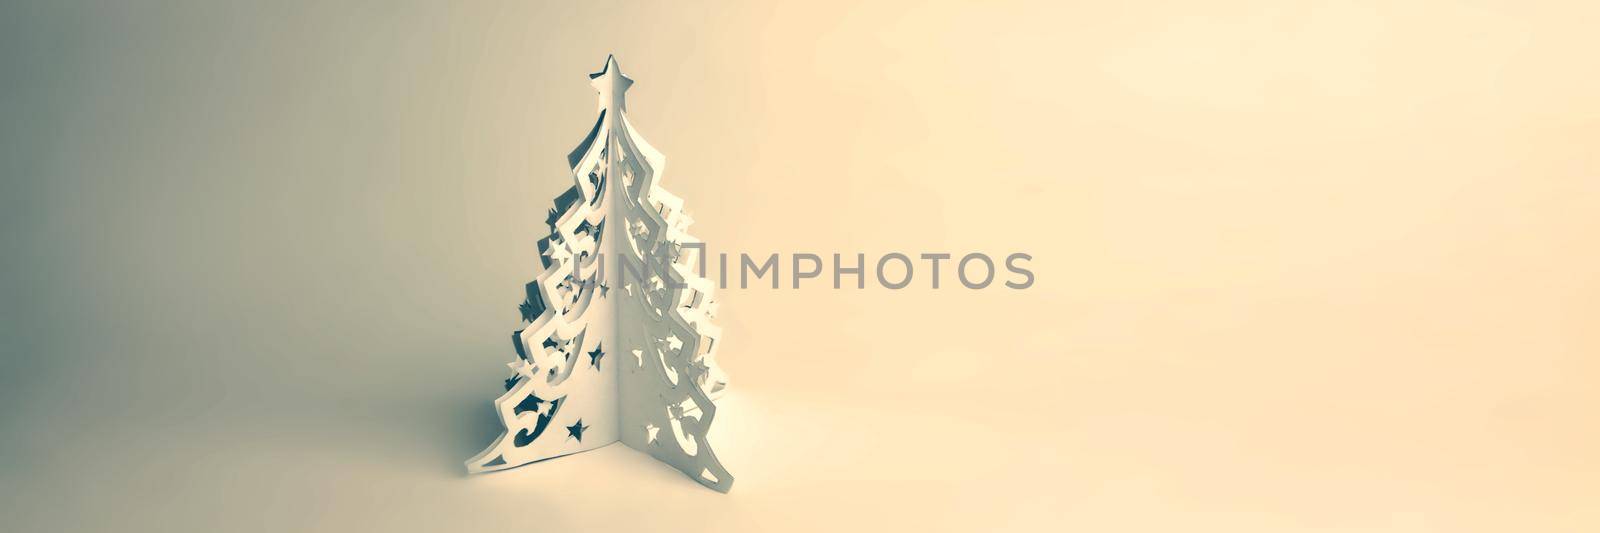 Winter background design concept with christmans tree by Taut